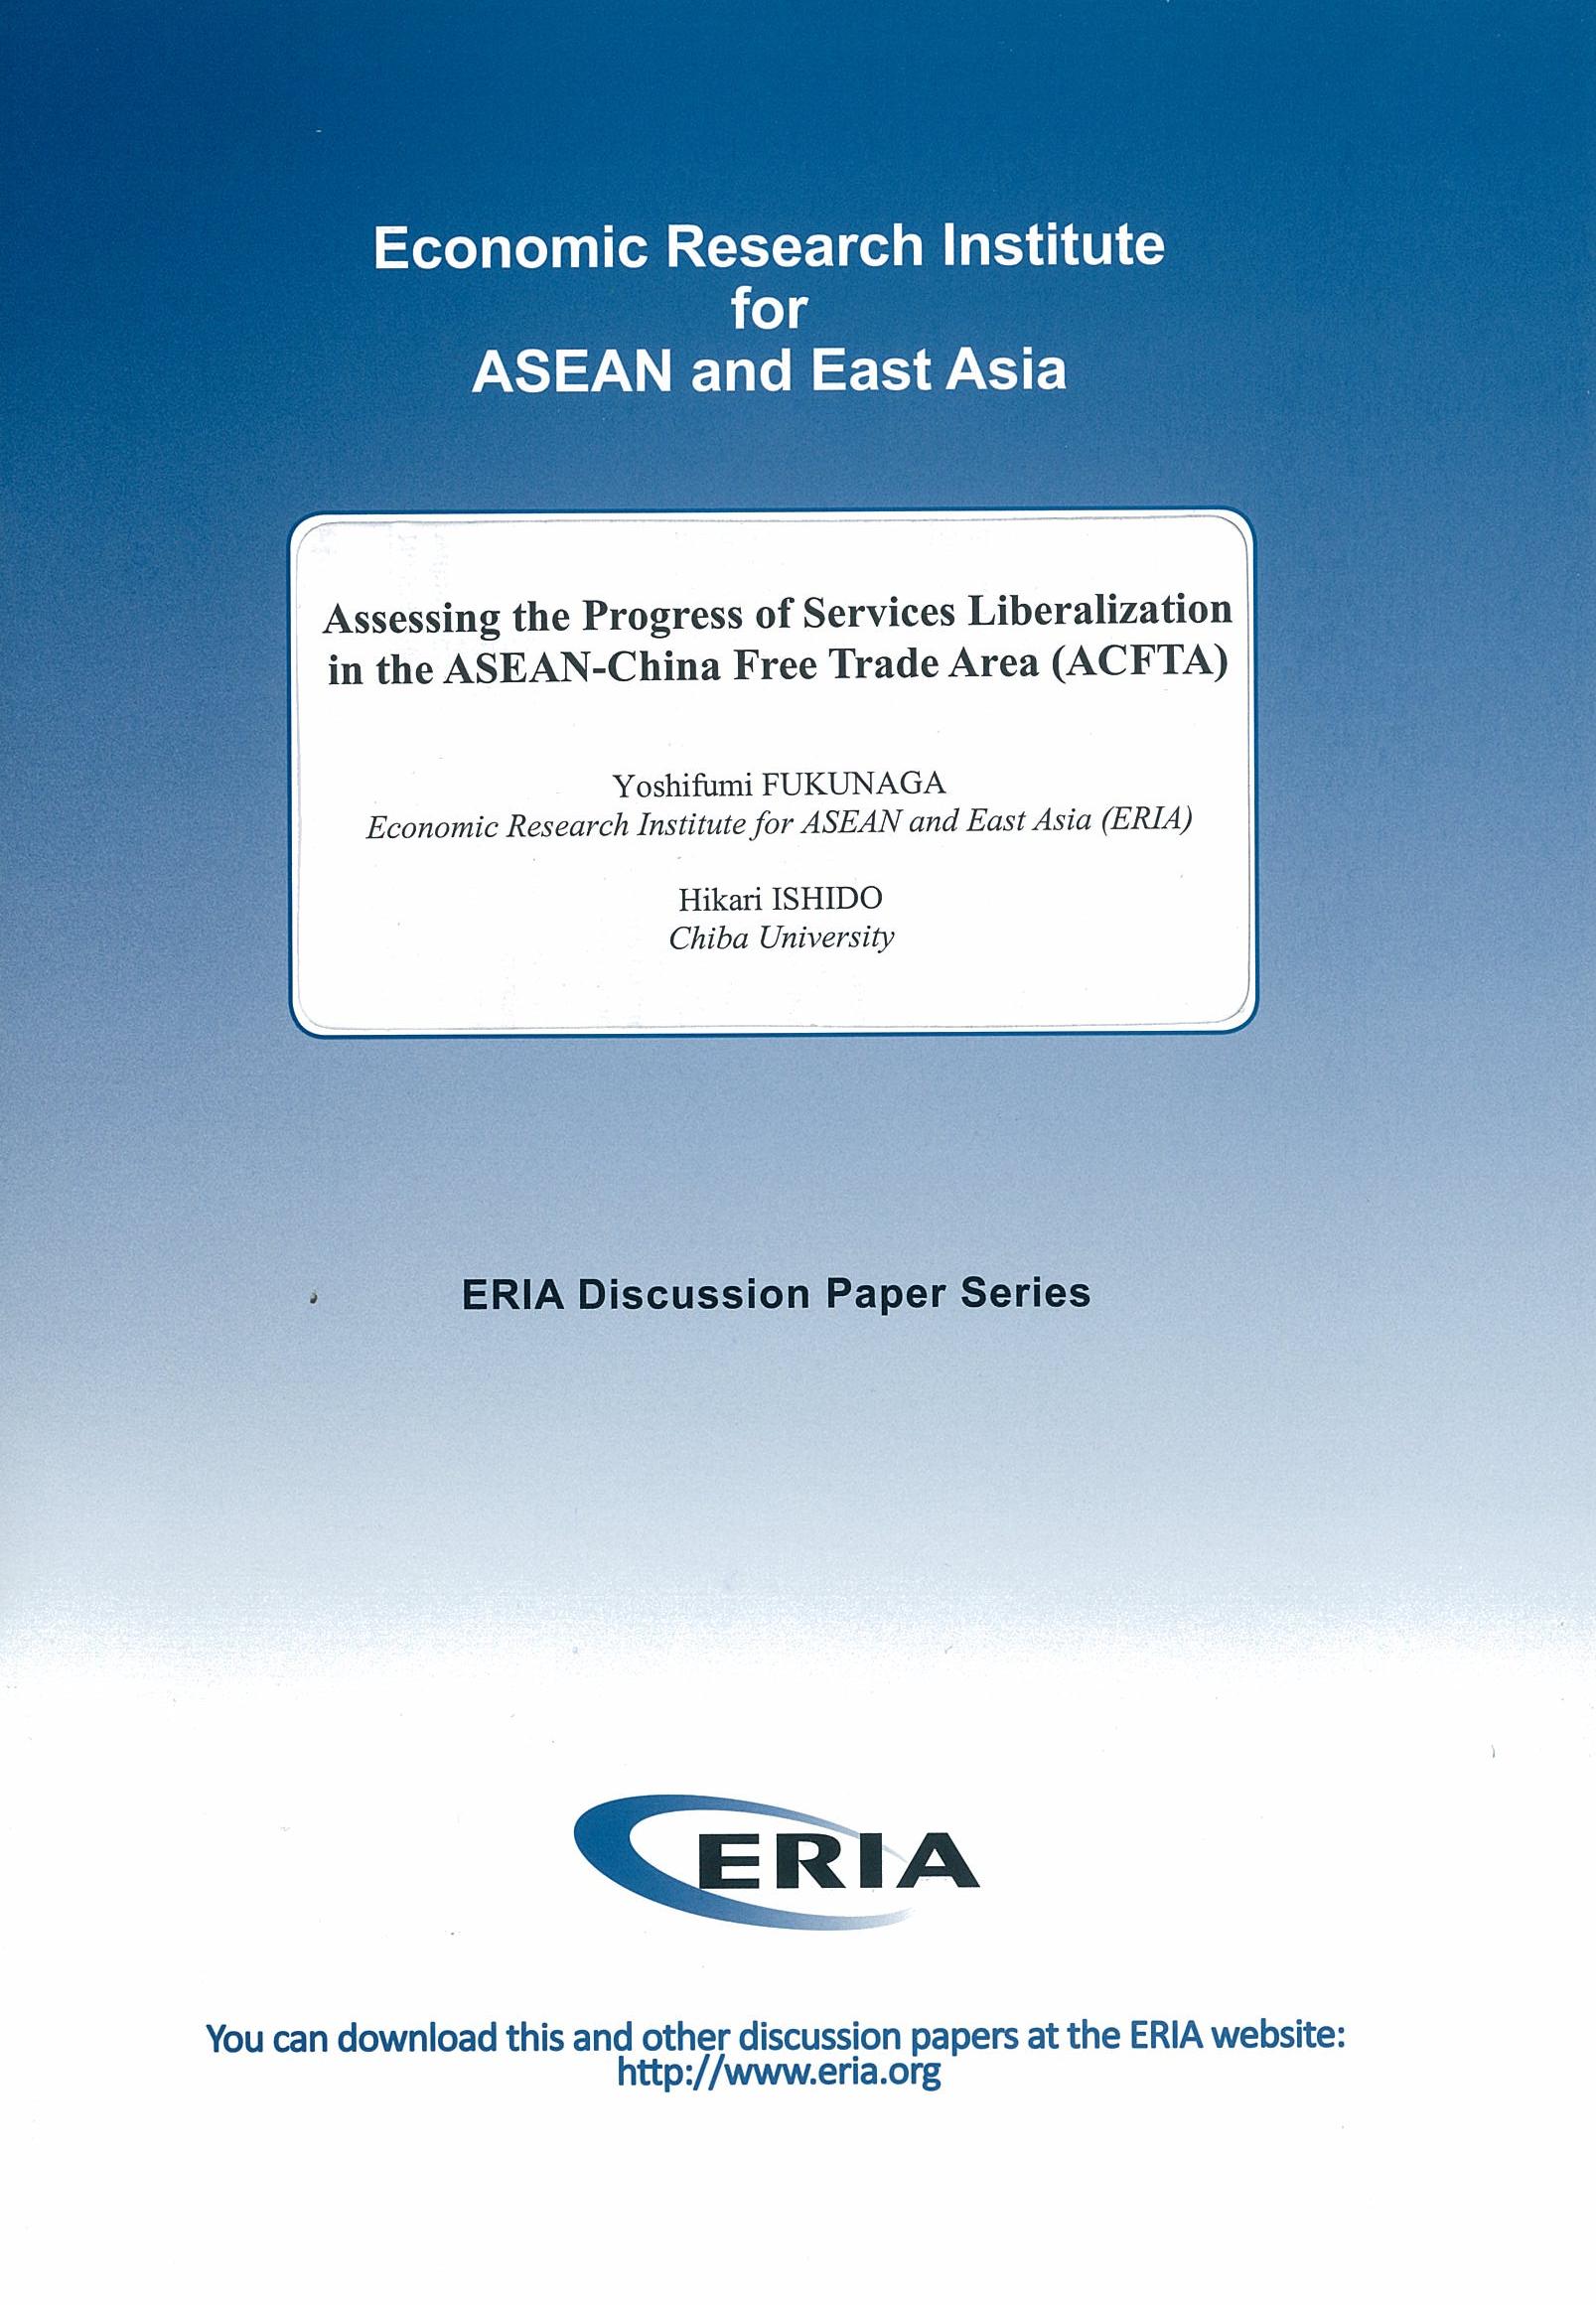 Assessing the Progress of Services Liberalization in the ASEAN-China Free Trade Area (ACFTA)